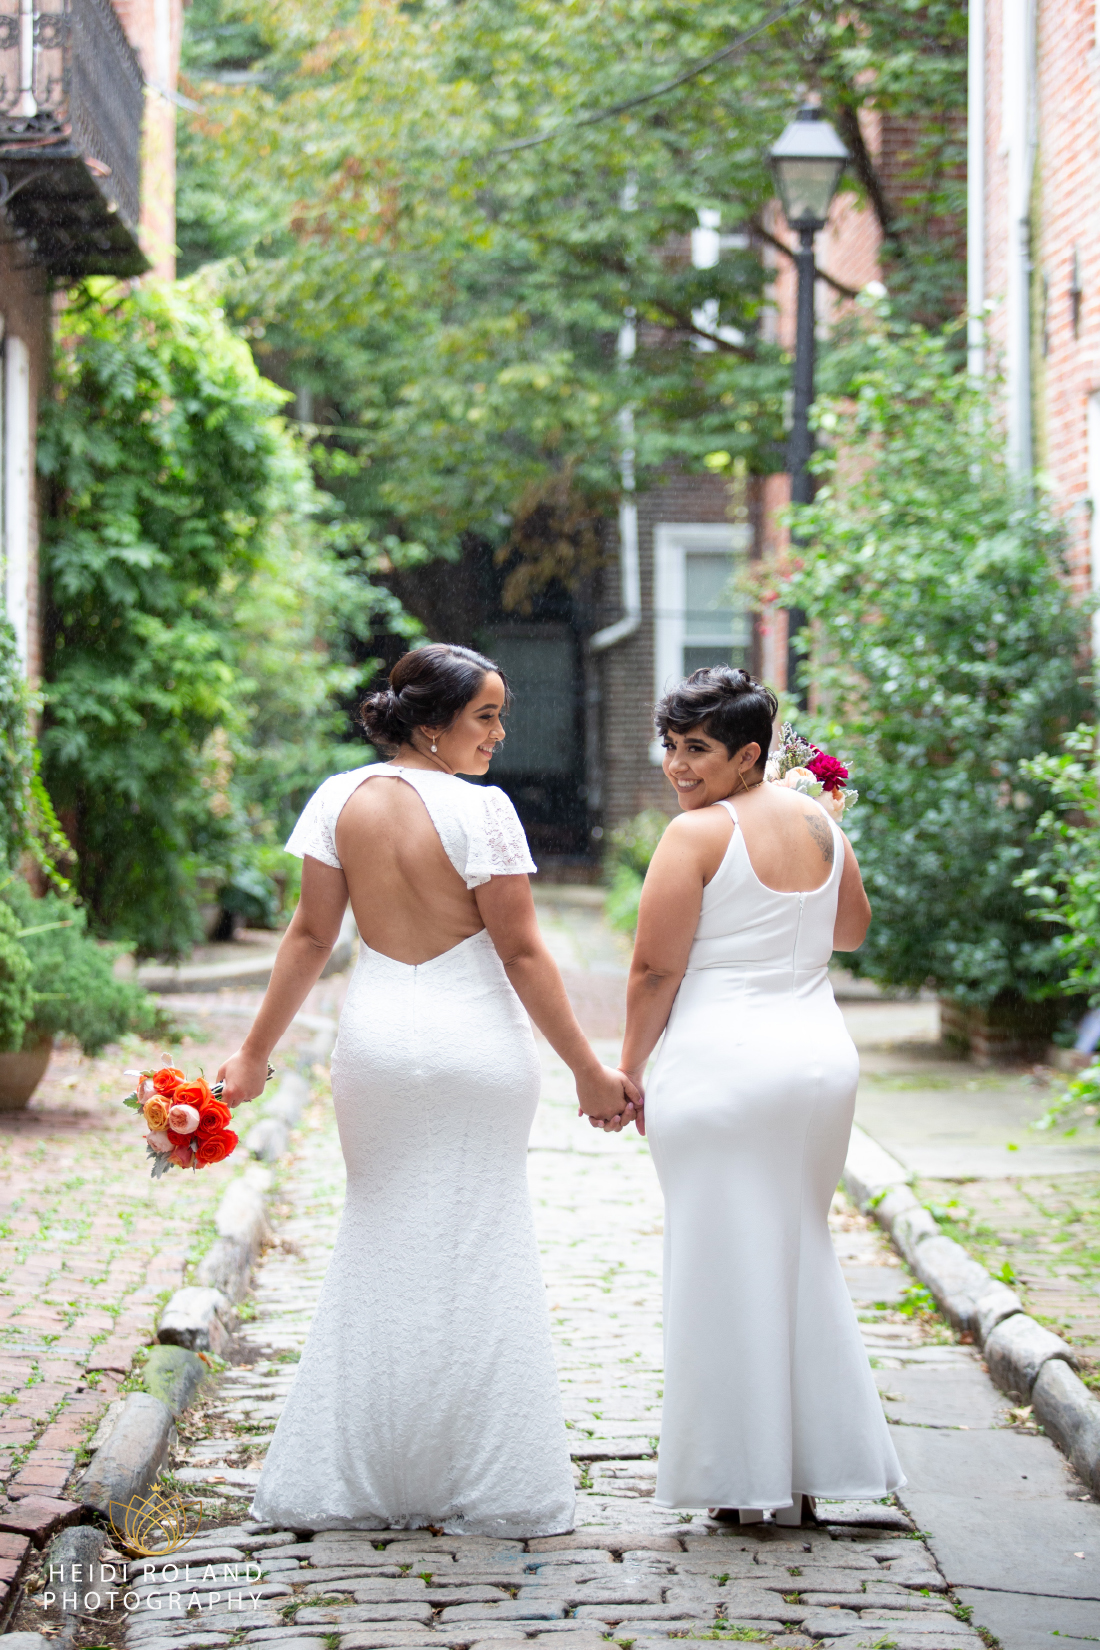 outside wedding photos in Philadelphia, two brides with colorful bouquets